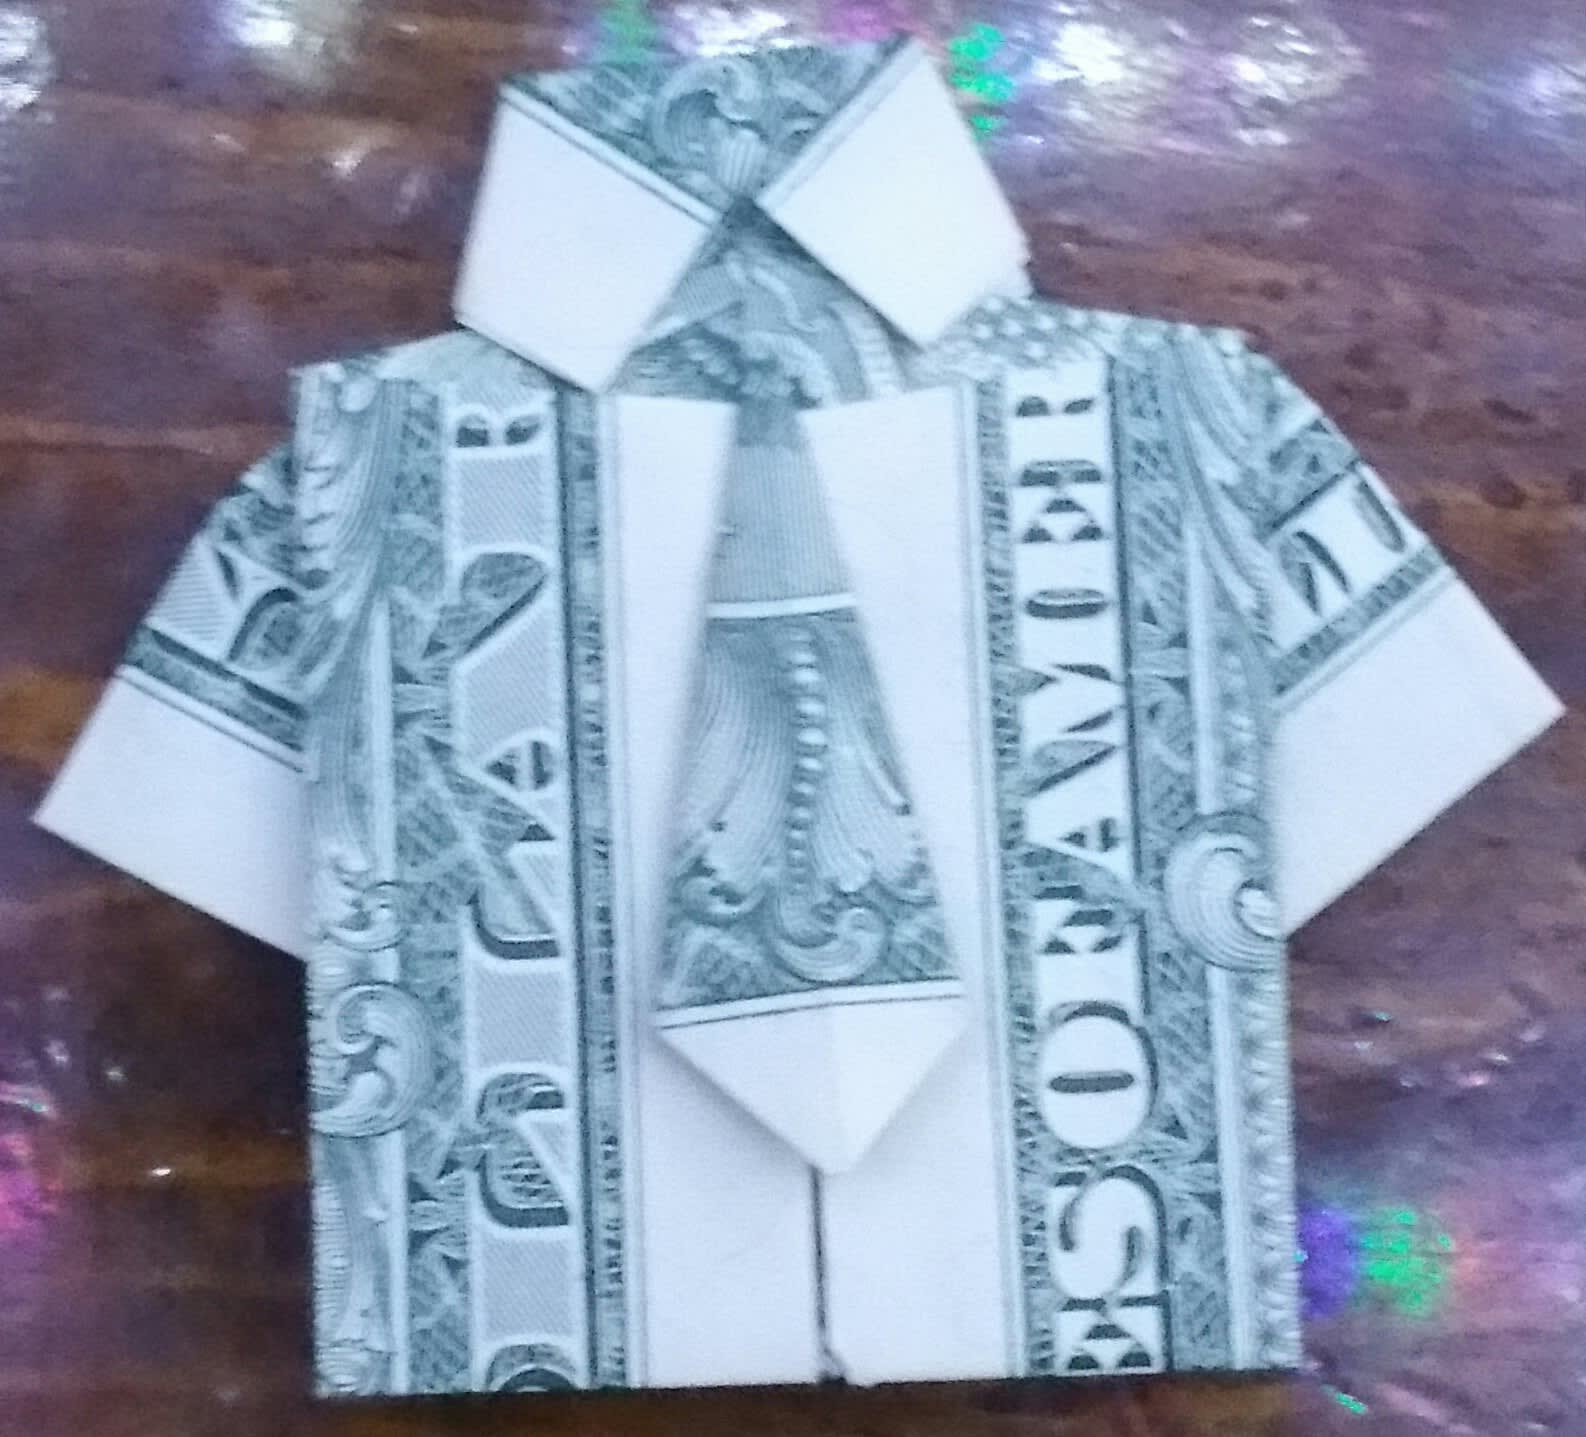 Origami Shirt And Tie Make You A Origami Shirt With Tie From A One Dollar Bill